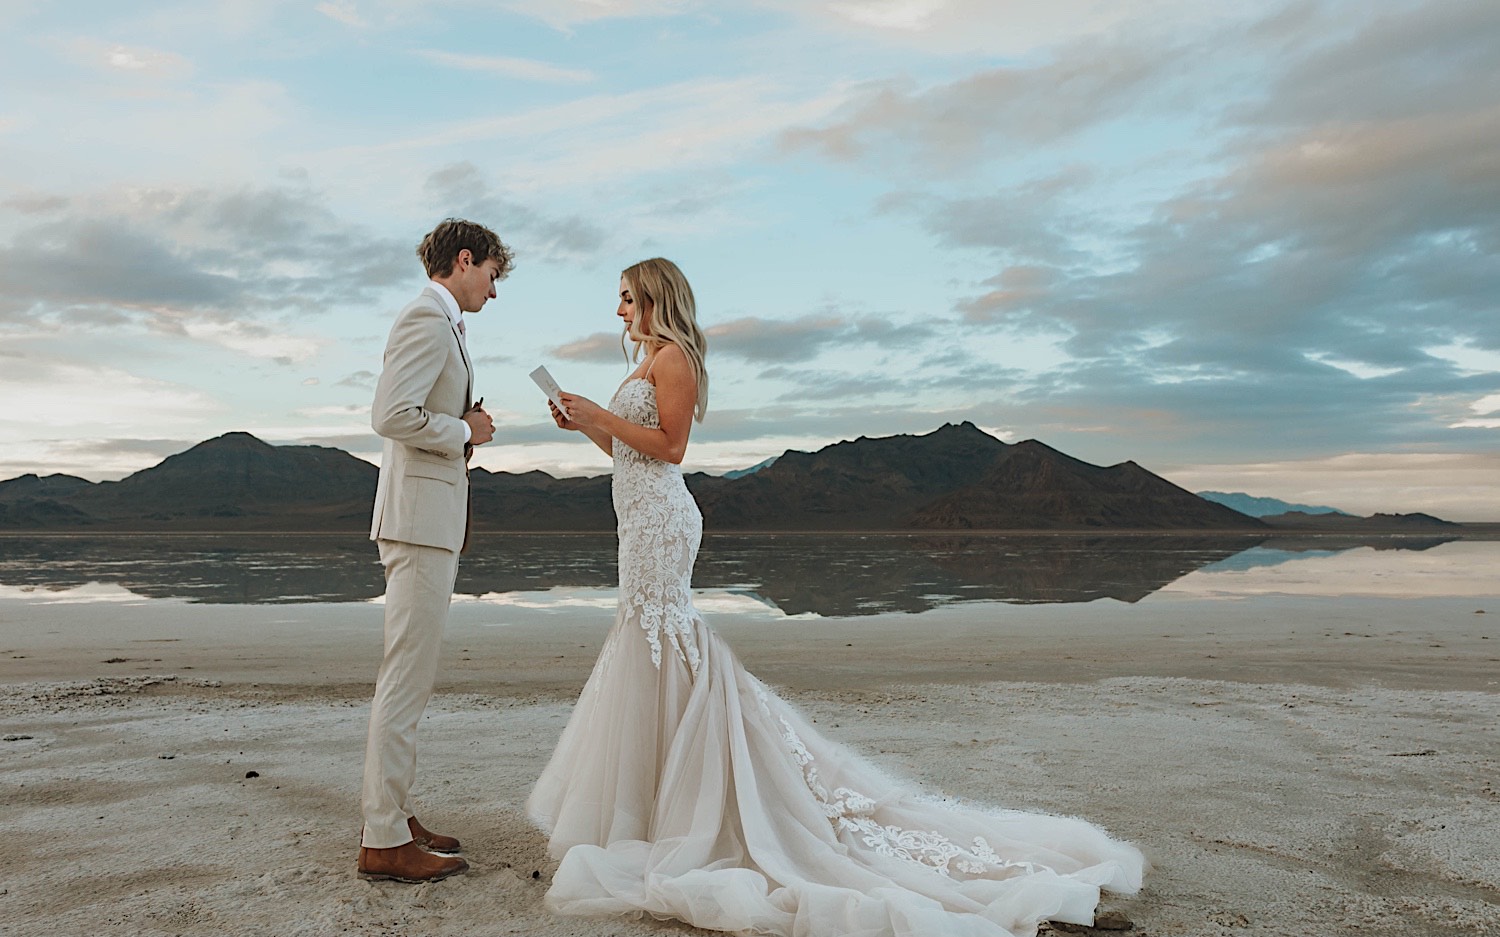 During their elopement in the Utah Salt Flats, a bride and groom stand facing one another and read their vows to each other with mountains behind them